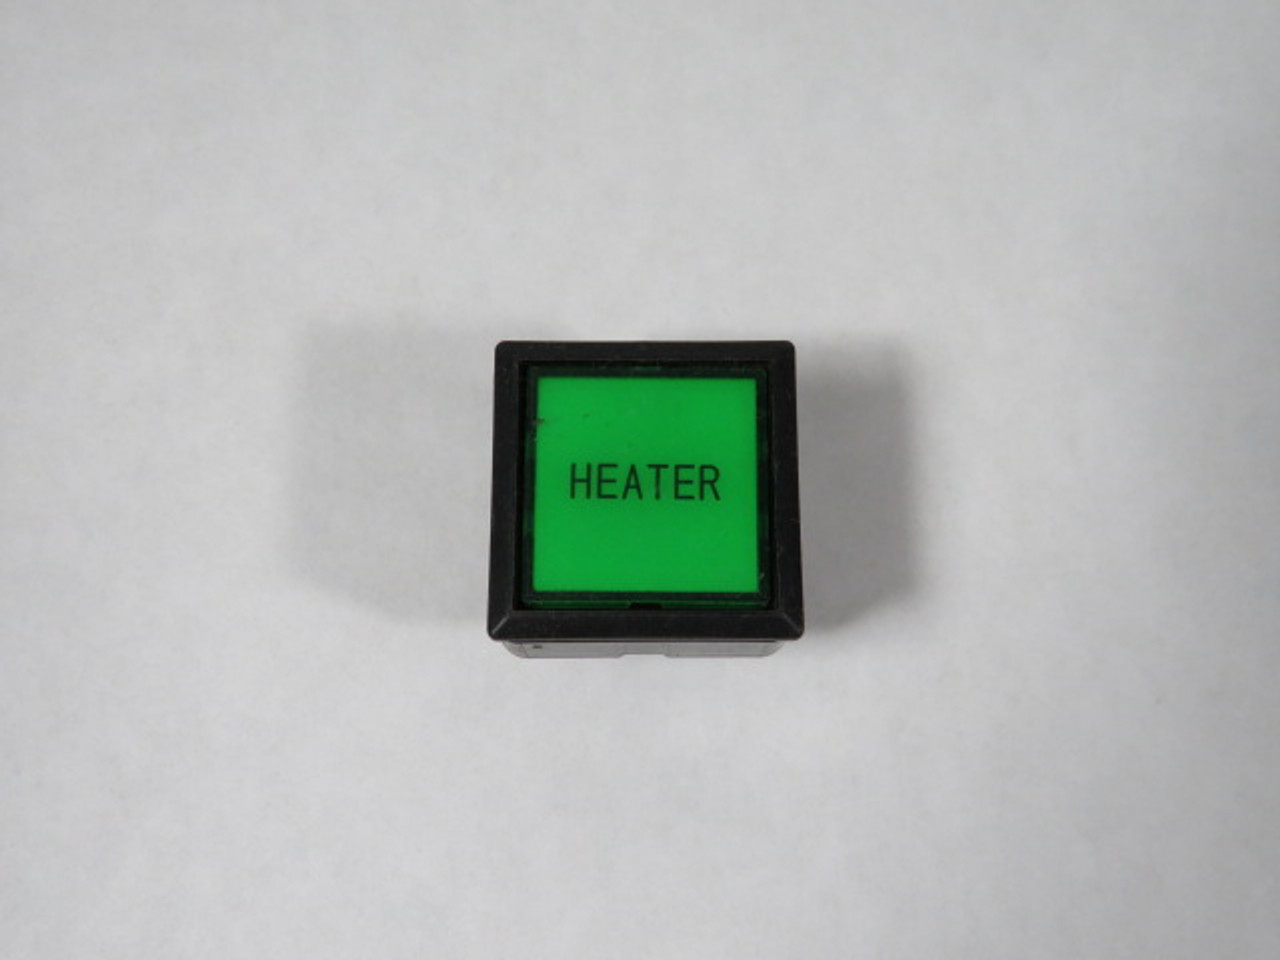 IDEC LW7L-M1-G Green Square Push Button Operator "HEATER" USED